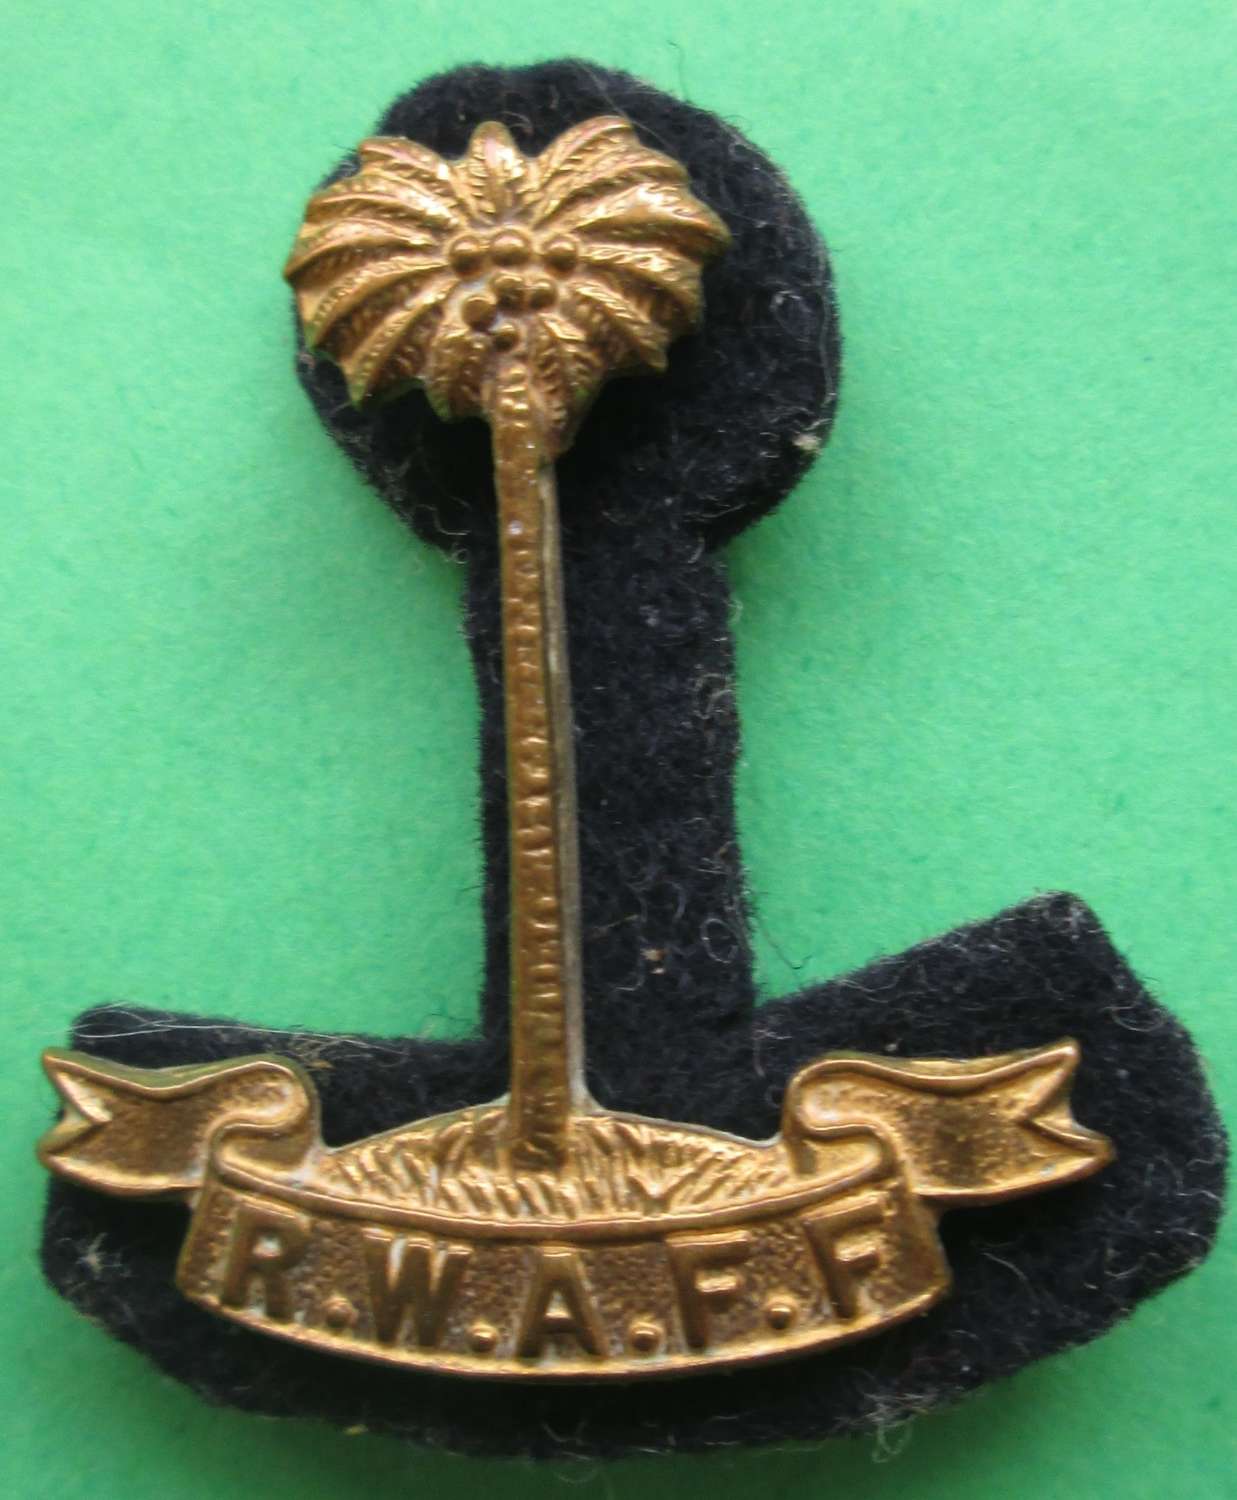 A ROYAL WEST AFRICAN FRONTIER FORCE GILT OFFICERS BADGE